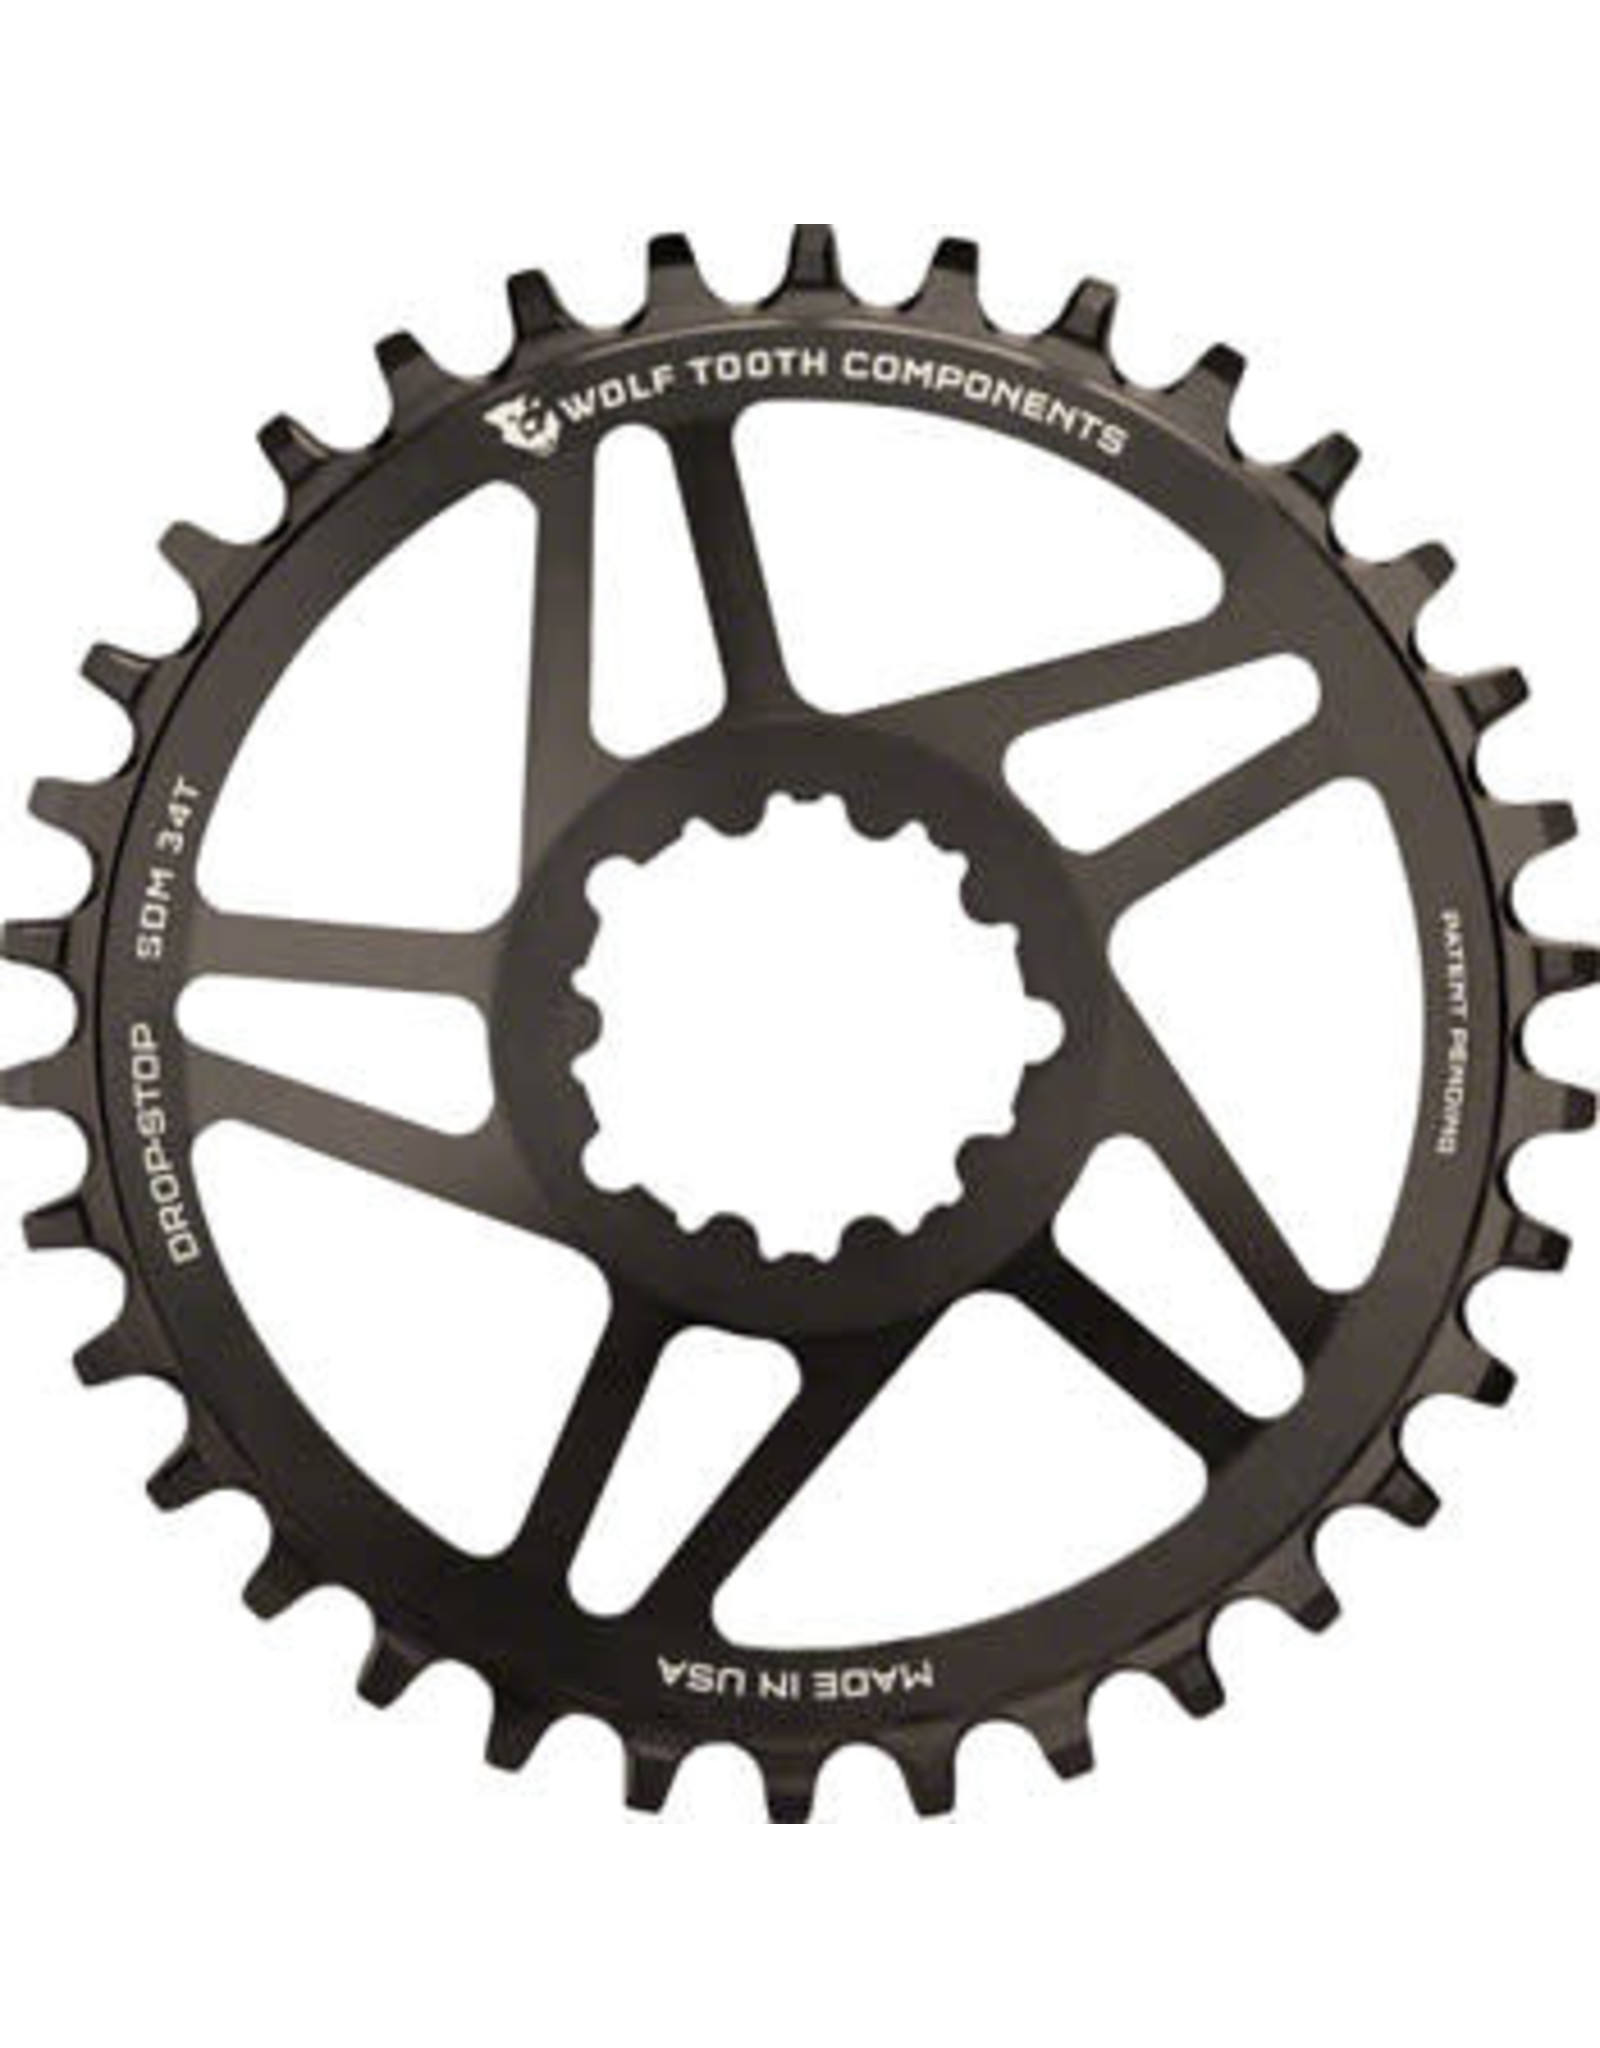 Wolf Tooth Components Wolf Tooth Direct Mount Chainring 36t SRAM Direct Mount Drop-Stop For SRAM 3-Bolt Cranksets 6mm Offset Black